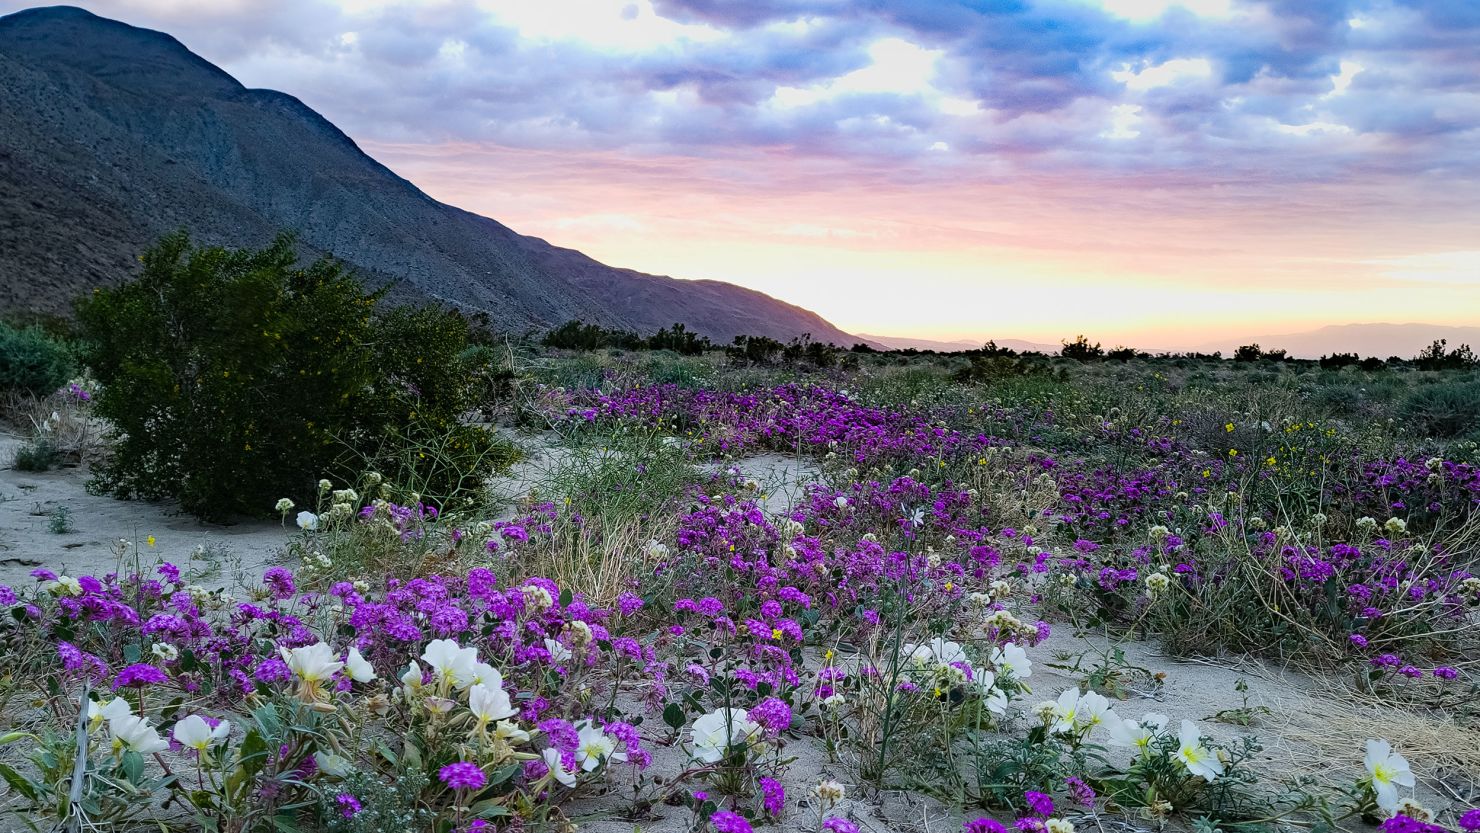 Wildflowers bloom in Anza-Borrego Desert State Park's Coyote Canyon at sunrise on Thursday, March 14.